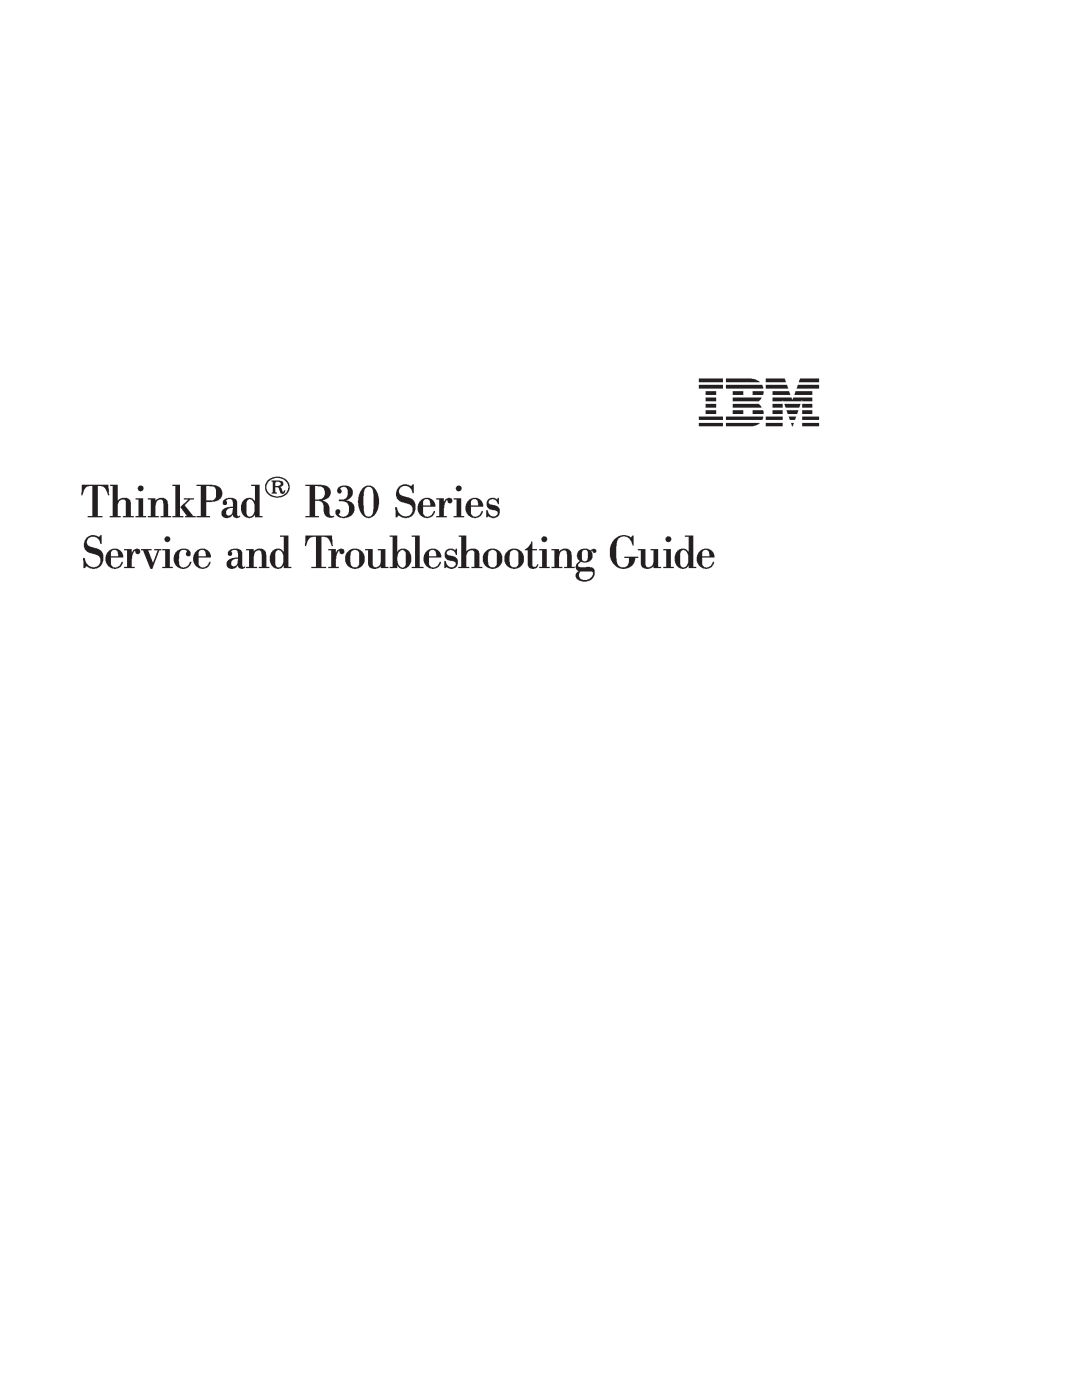 IBM manual ThinkPad R30 Series Service and Troubleshooting Guide 